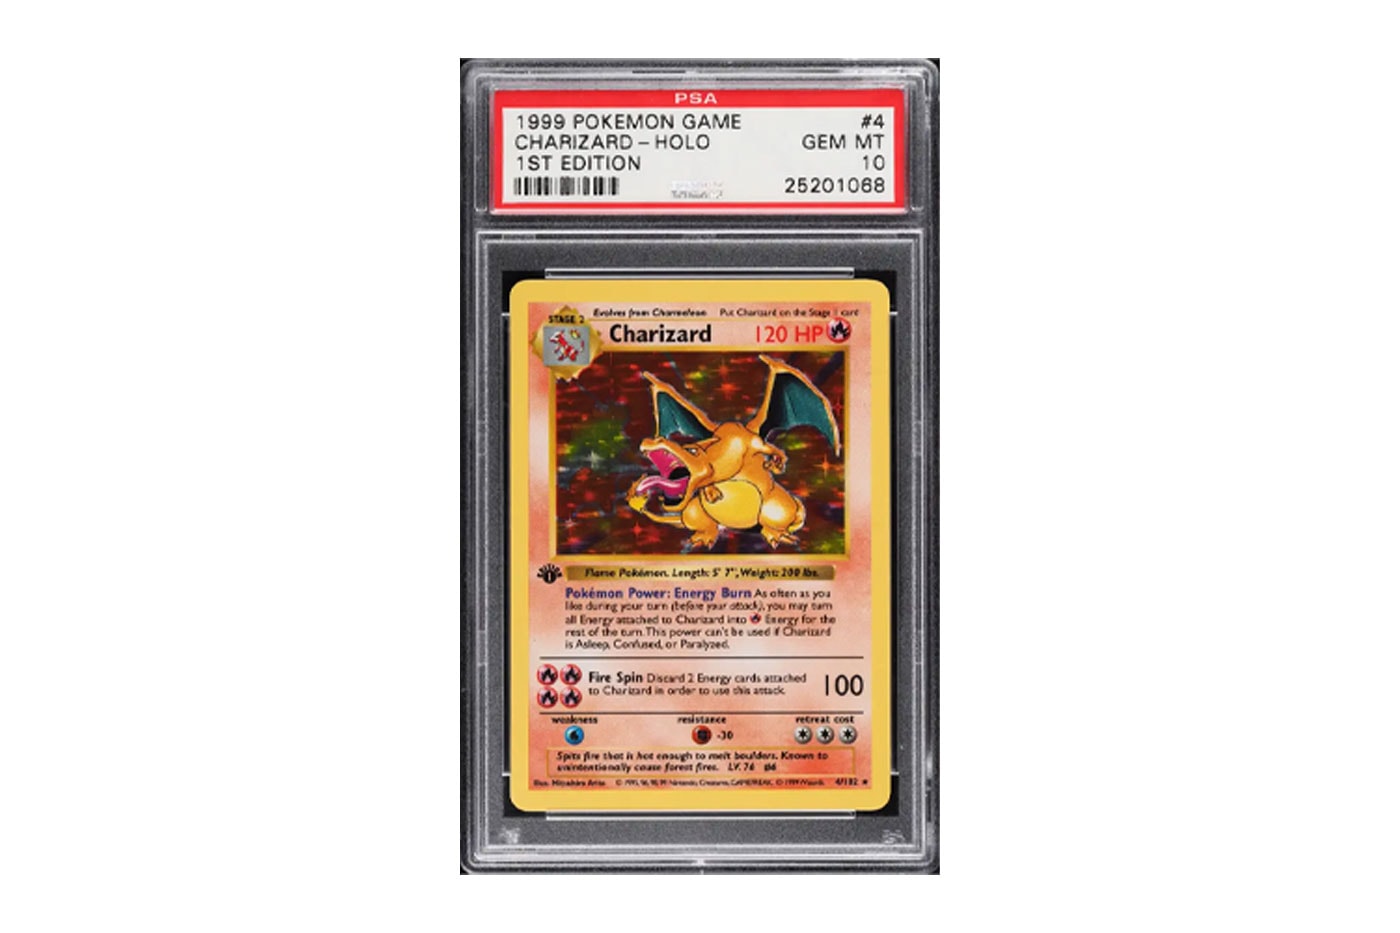 A Pokémon Base Set First Edition Holo Charizard Sets All-time Record, Fetching $420,000 USD at Auction 1999 Pokémon Base Set Shadowless 1st Edition Holo Charizard psa 10 gem mint all-time record trading card tcg pokemon 420 pwcc auctions